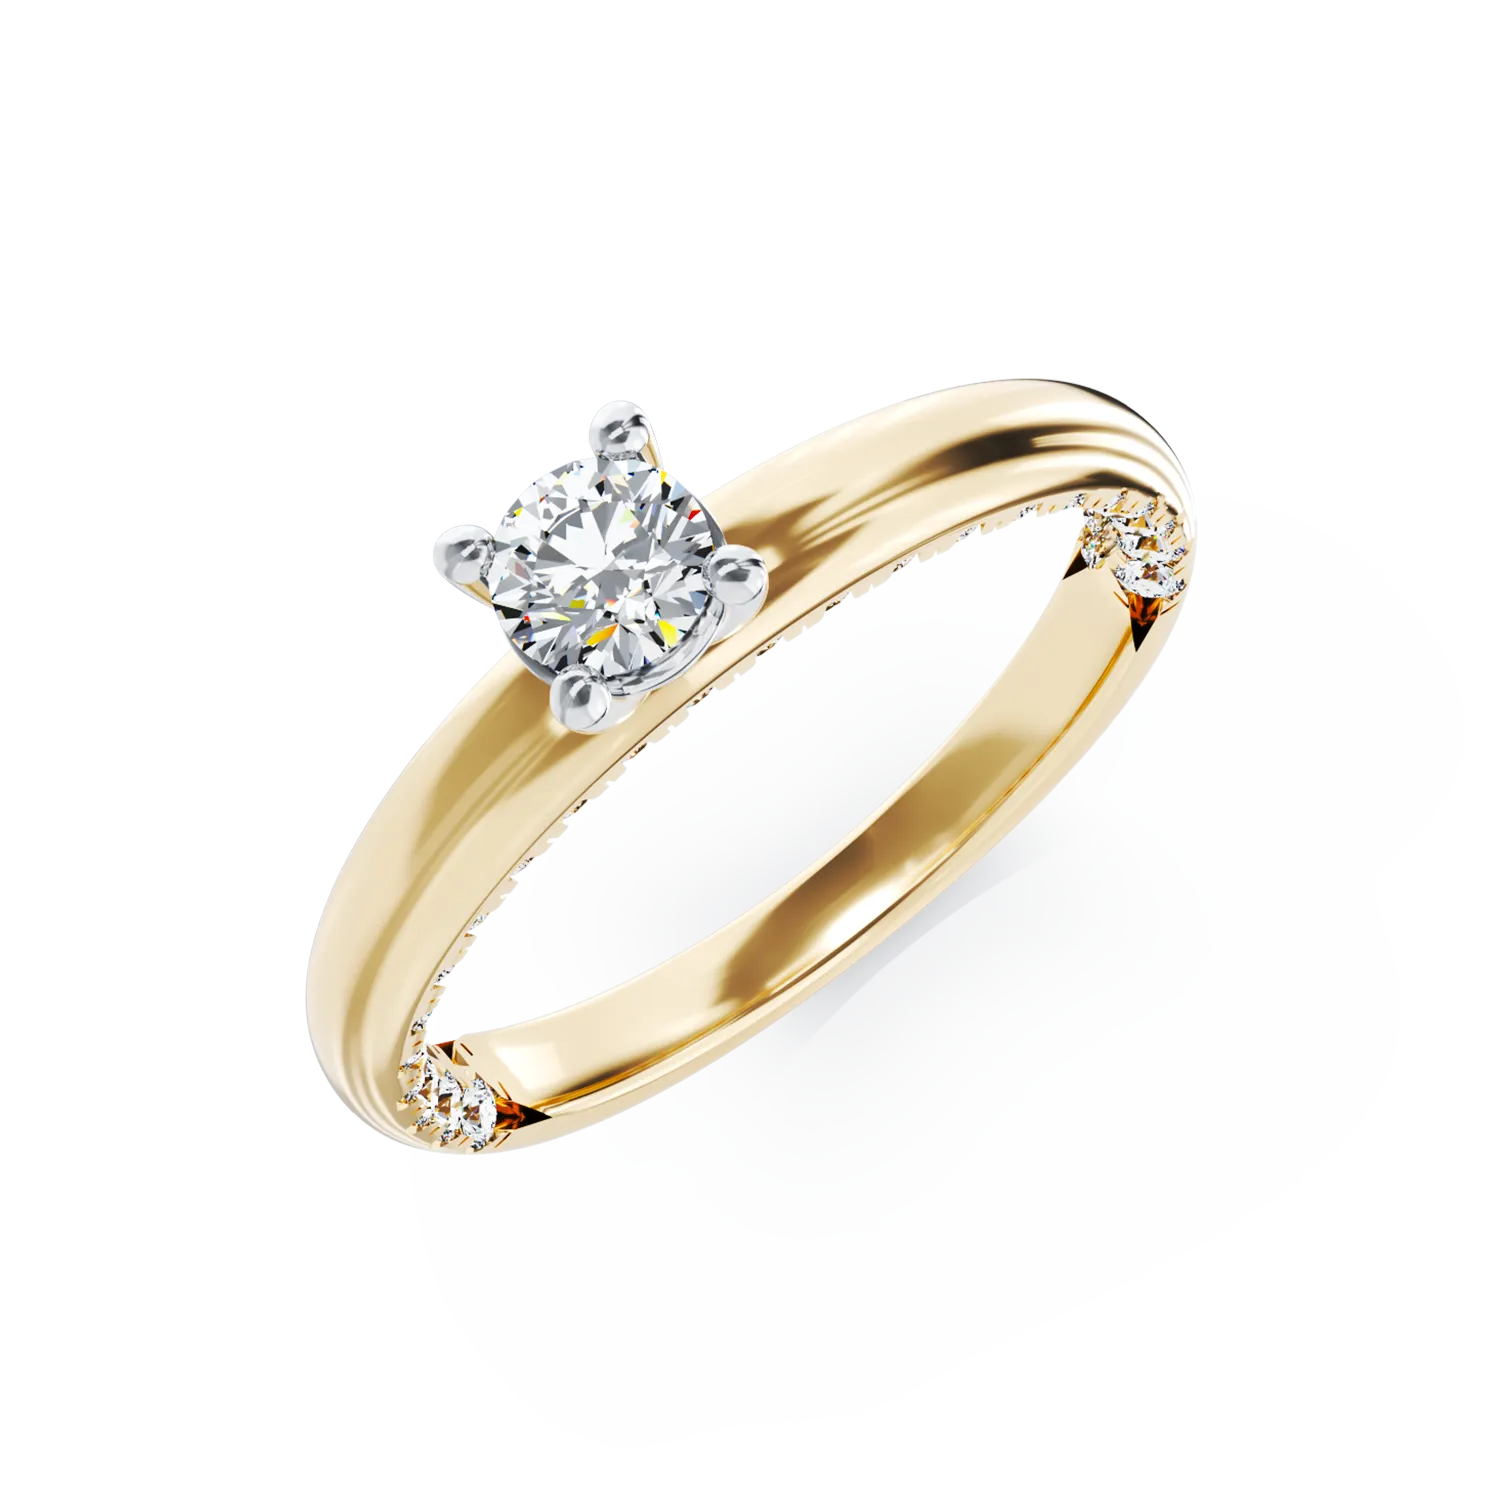 18K yellow gold engagement ring with 0.2ct diamond and 0.2ct diamonds